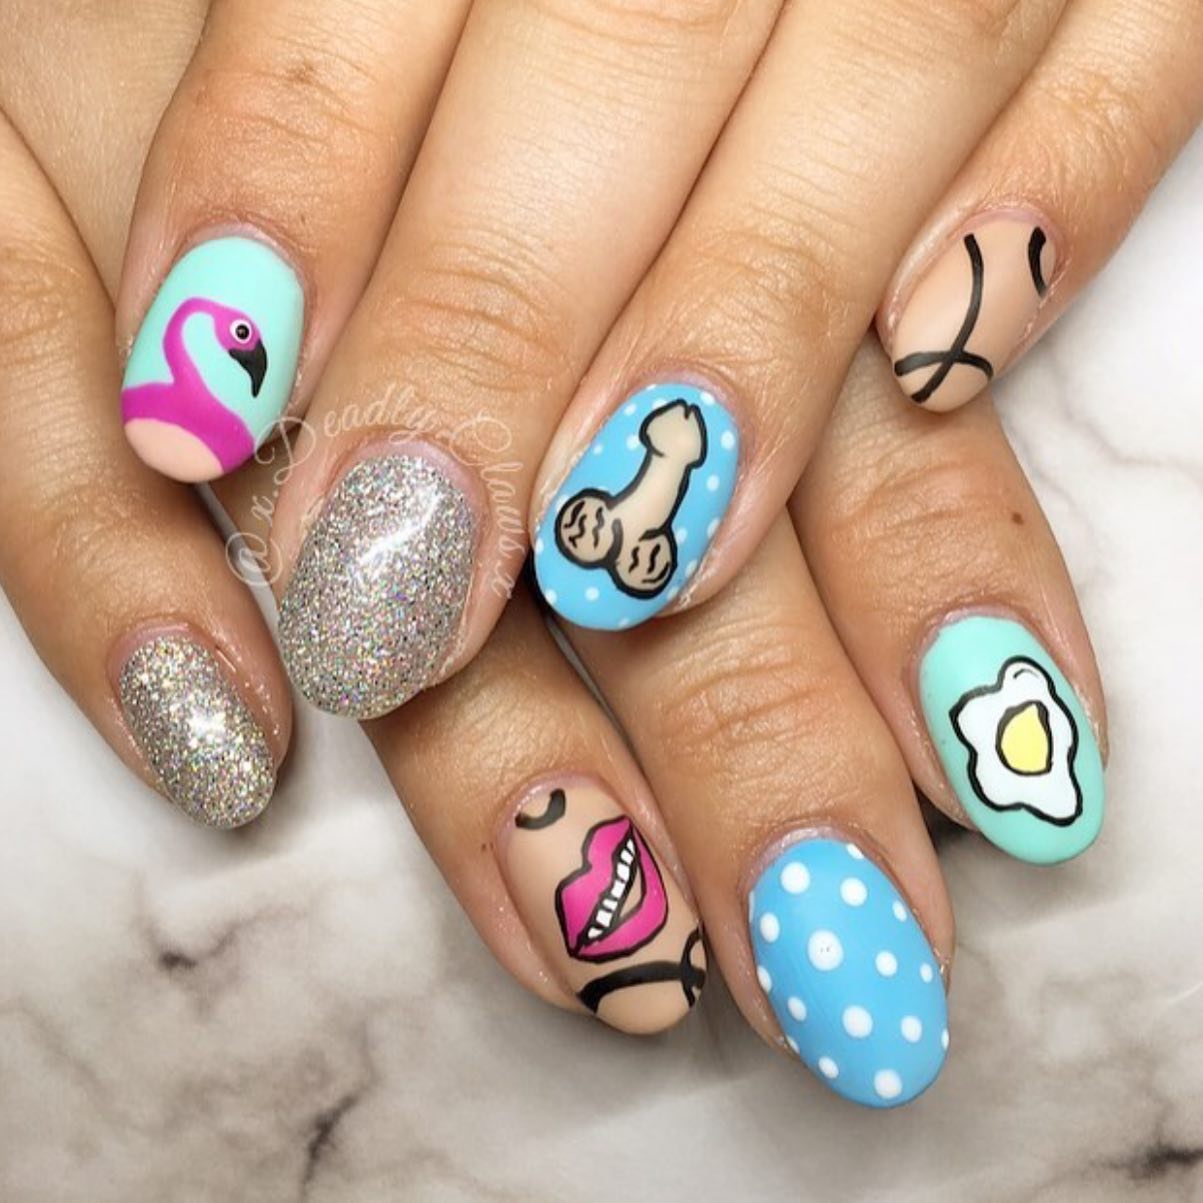 Flamingos and lips and penises, oh my god! Oh, and also an egg... This is for those who can go crazy with their nails.